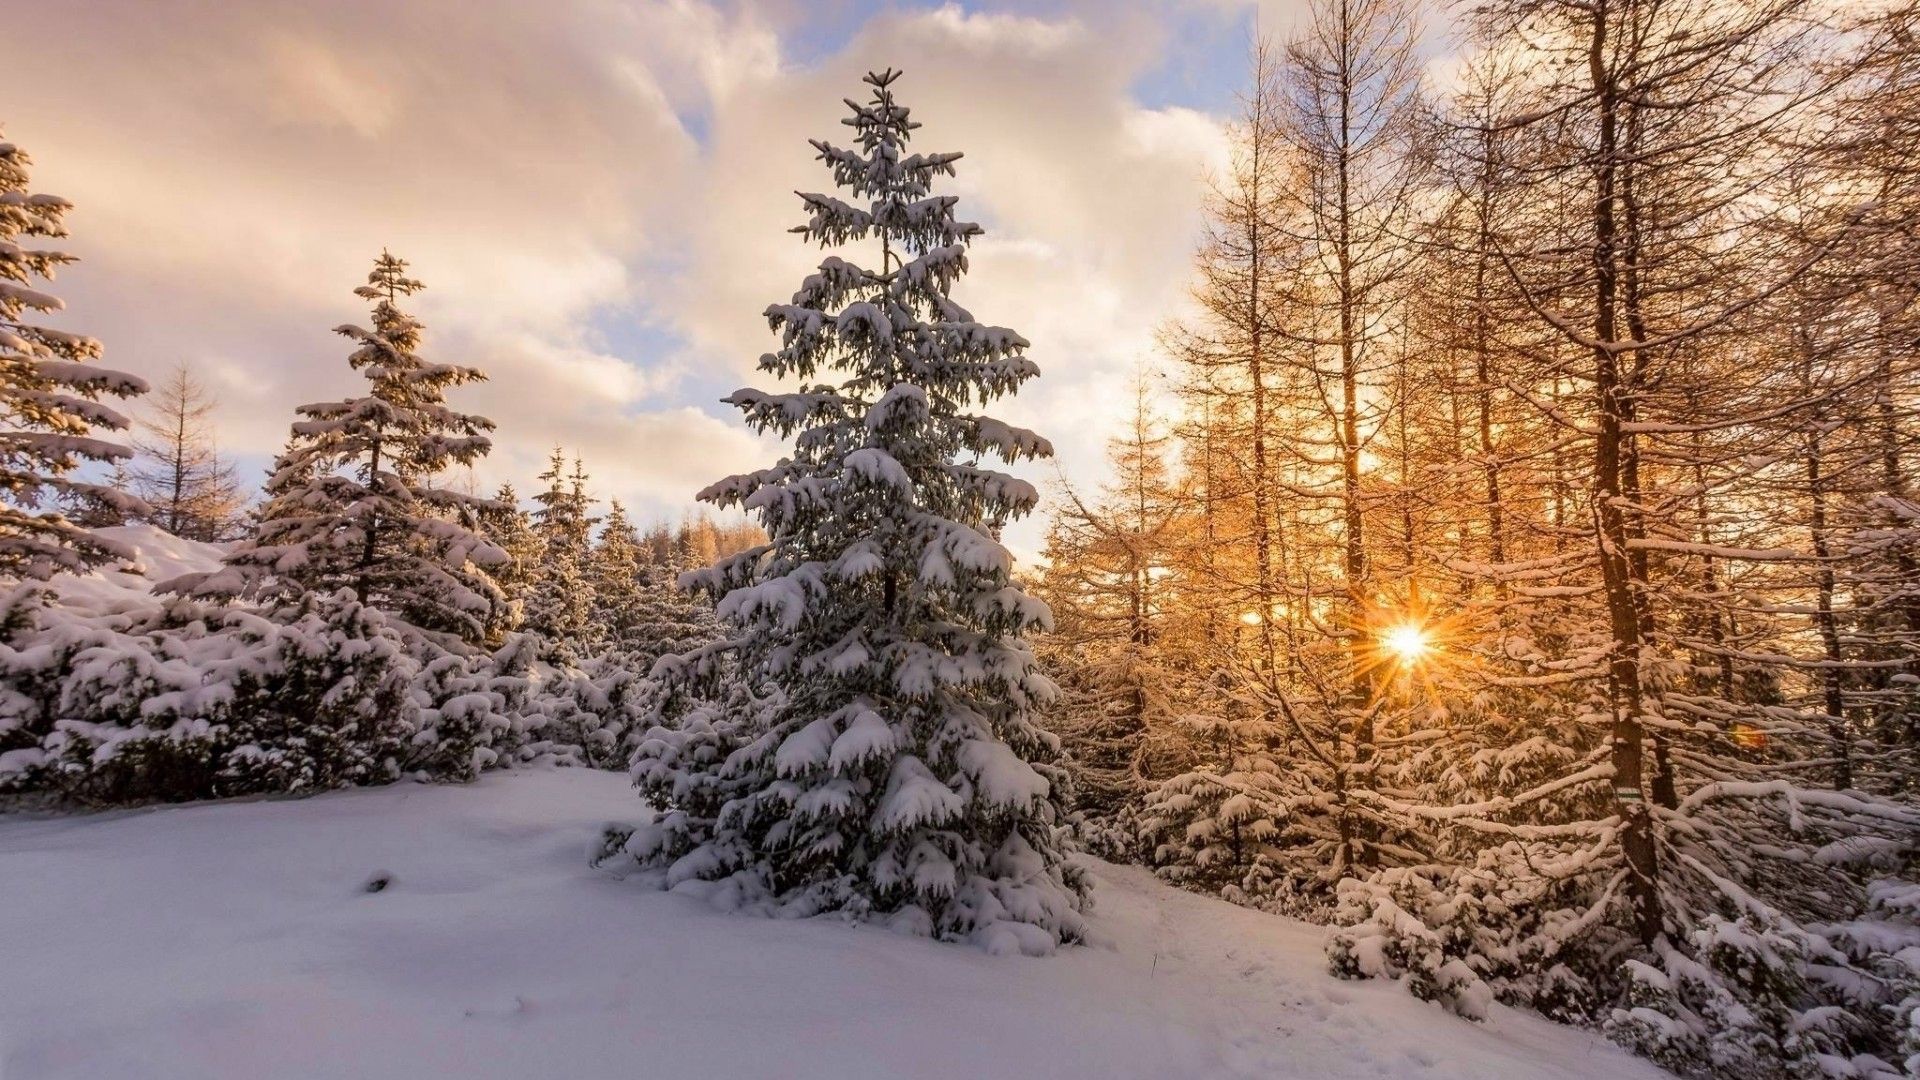 Download 1920x1080 Snow, Winter, Sunset, Pine Tree Wallpaper for Widescreen